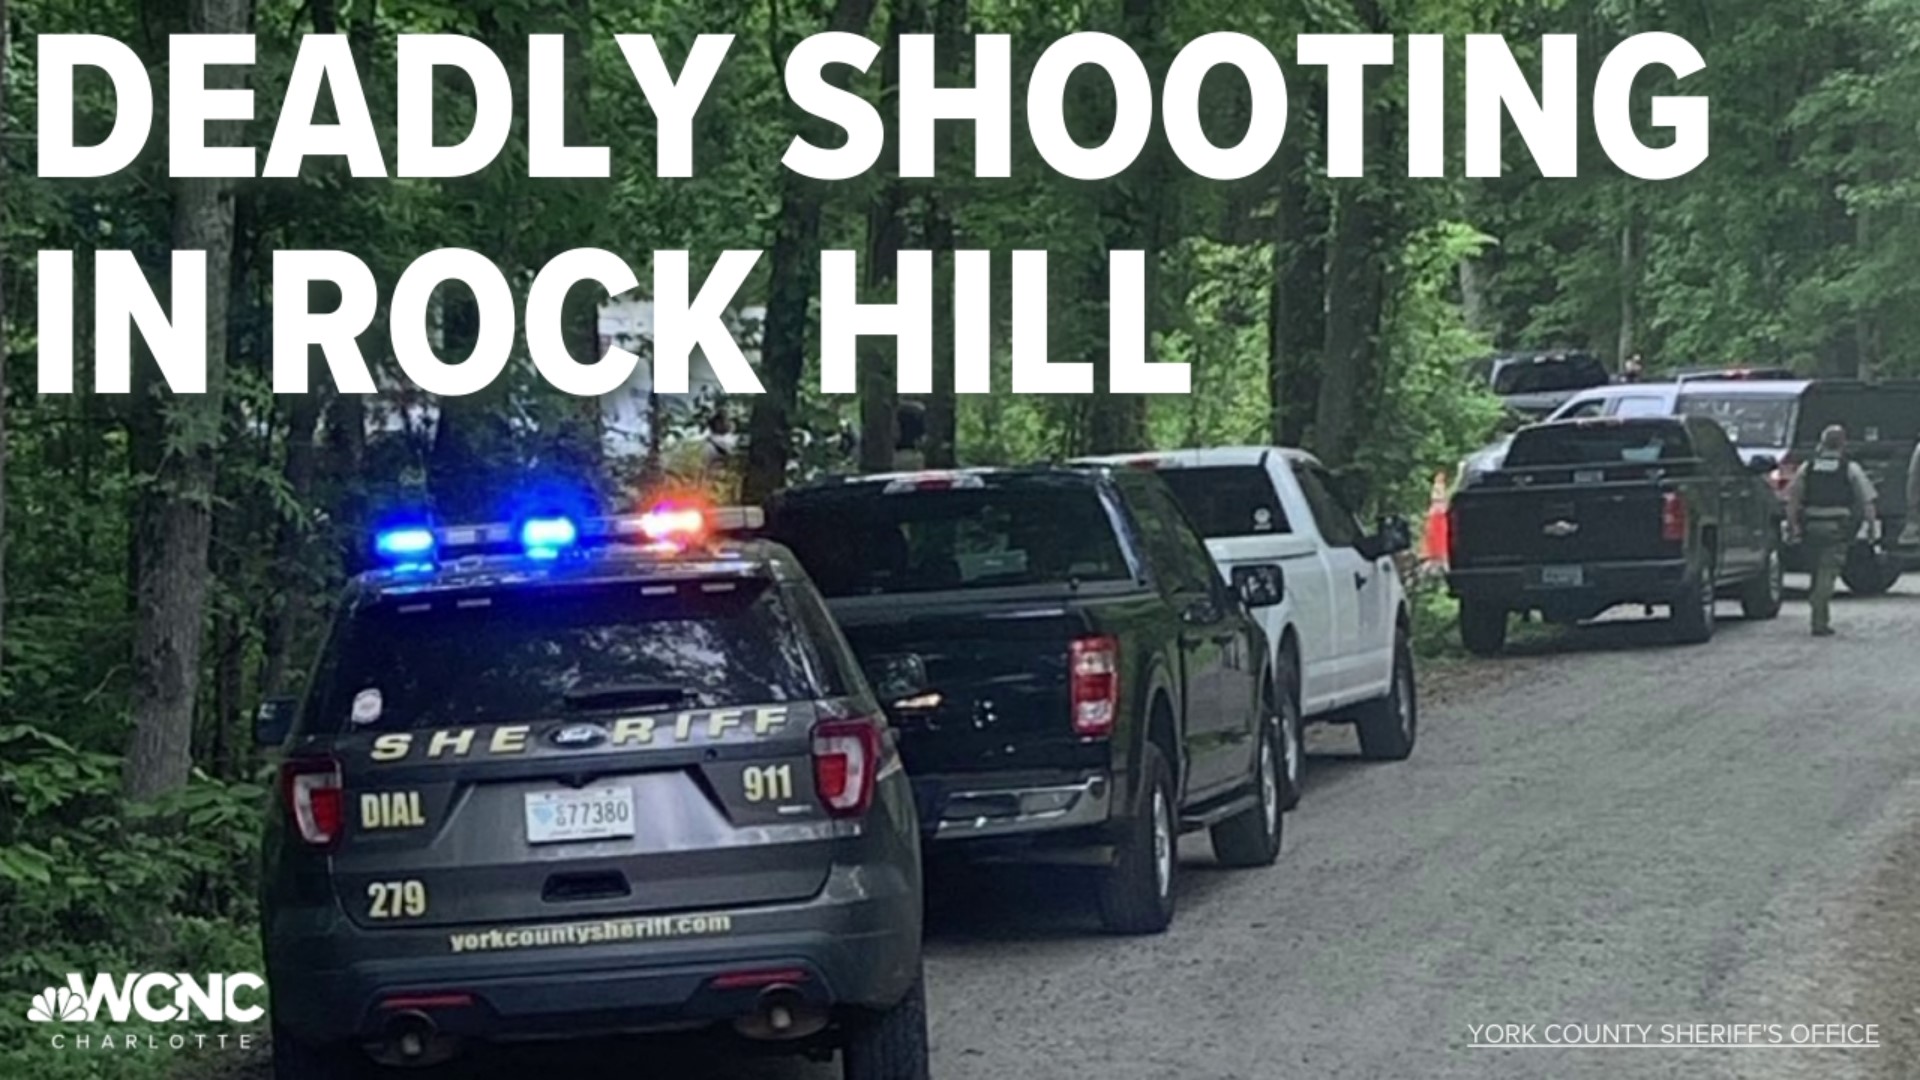 The York County Sheriff's Office is investigating a deadly shooting in the Rock Hill area that reportedly unfolded sometime on Friday.